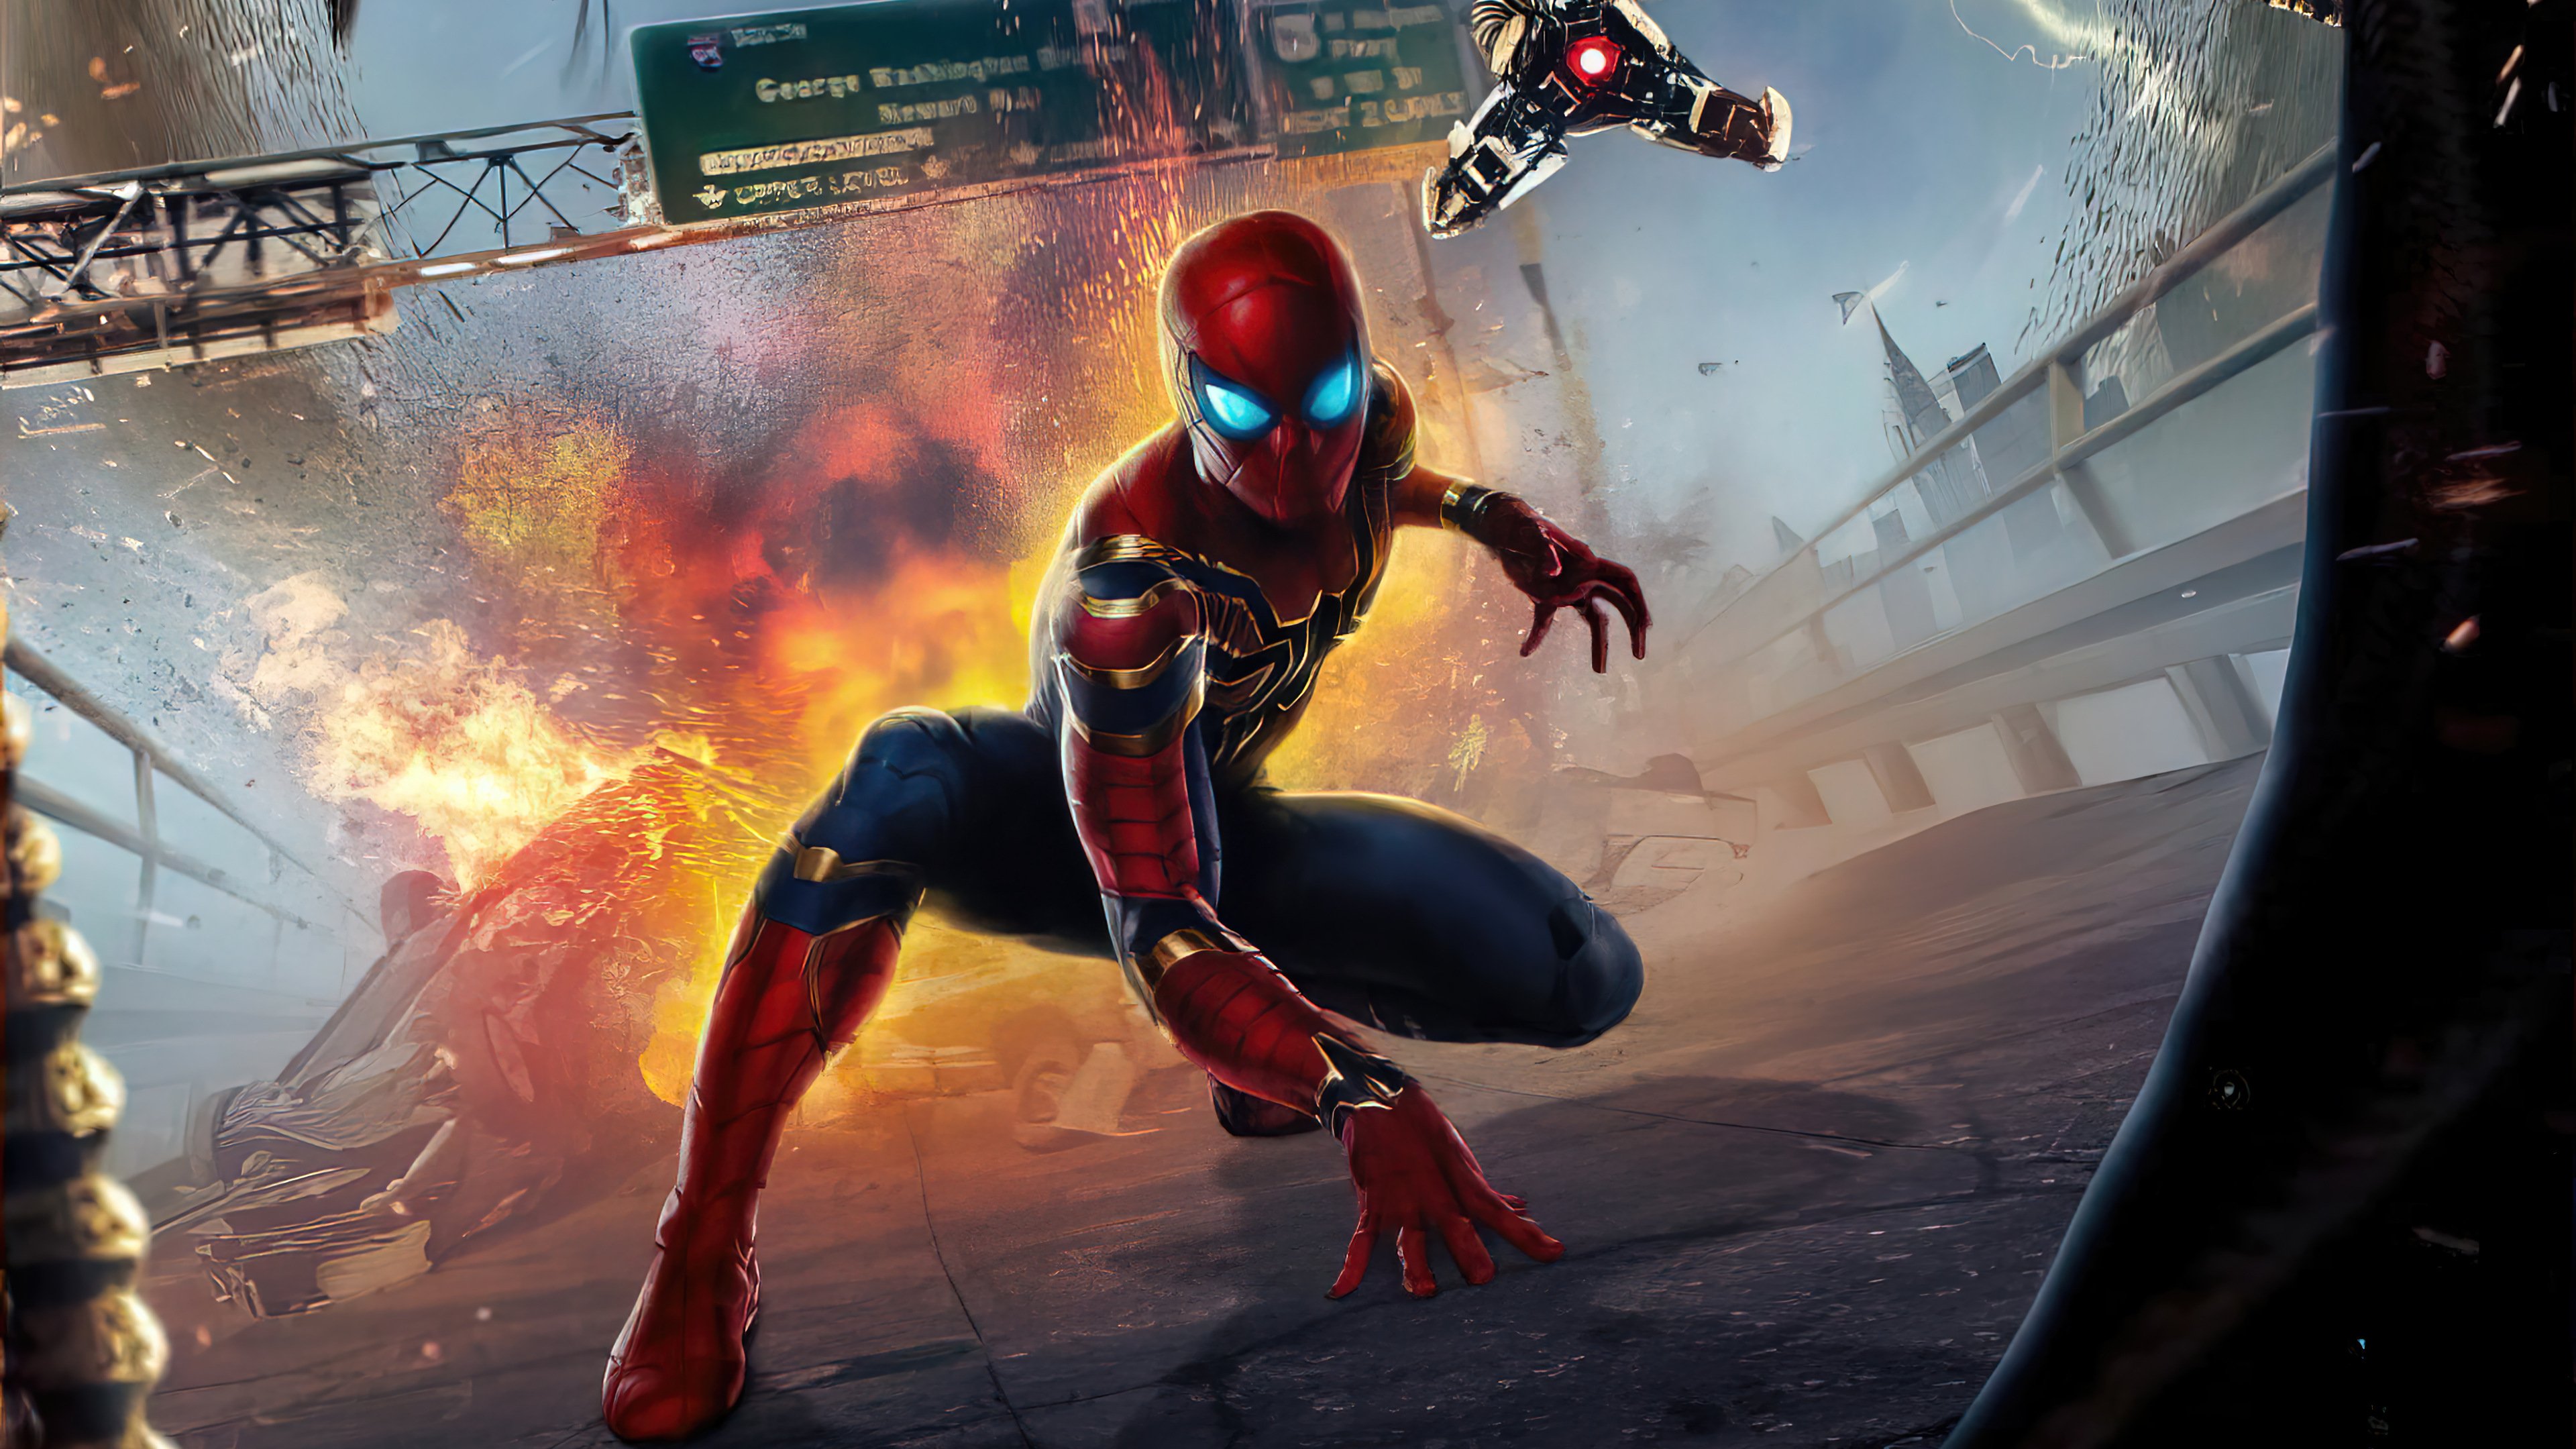 Wallpaper Spider Man with explotion behind